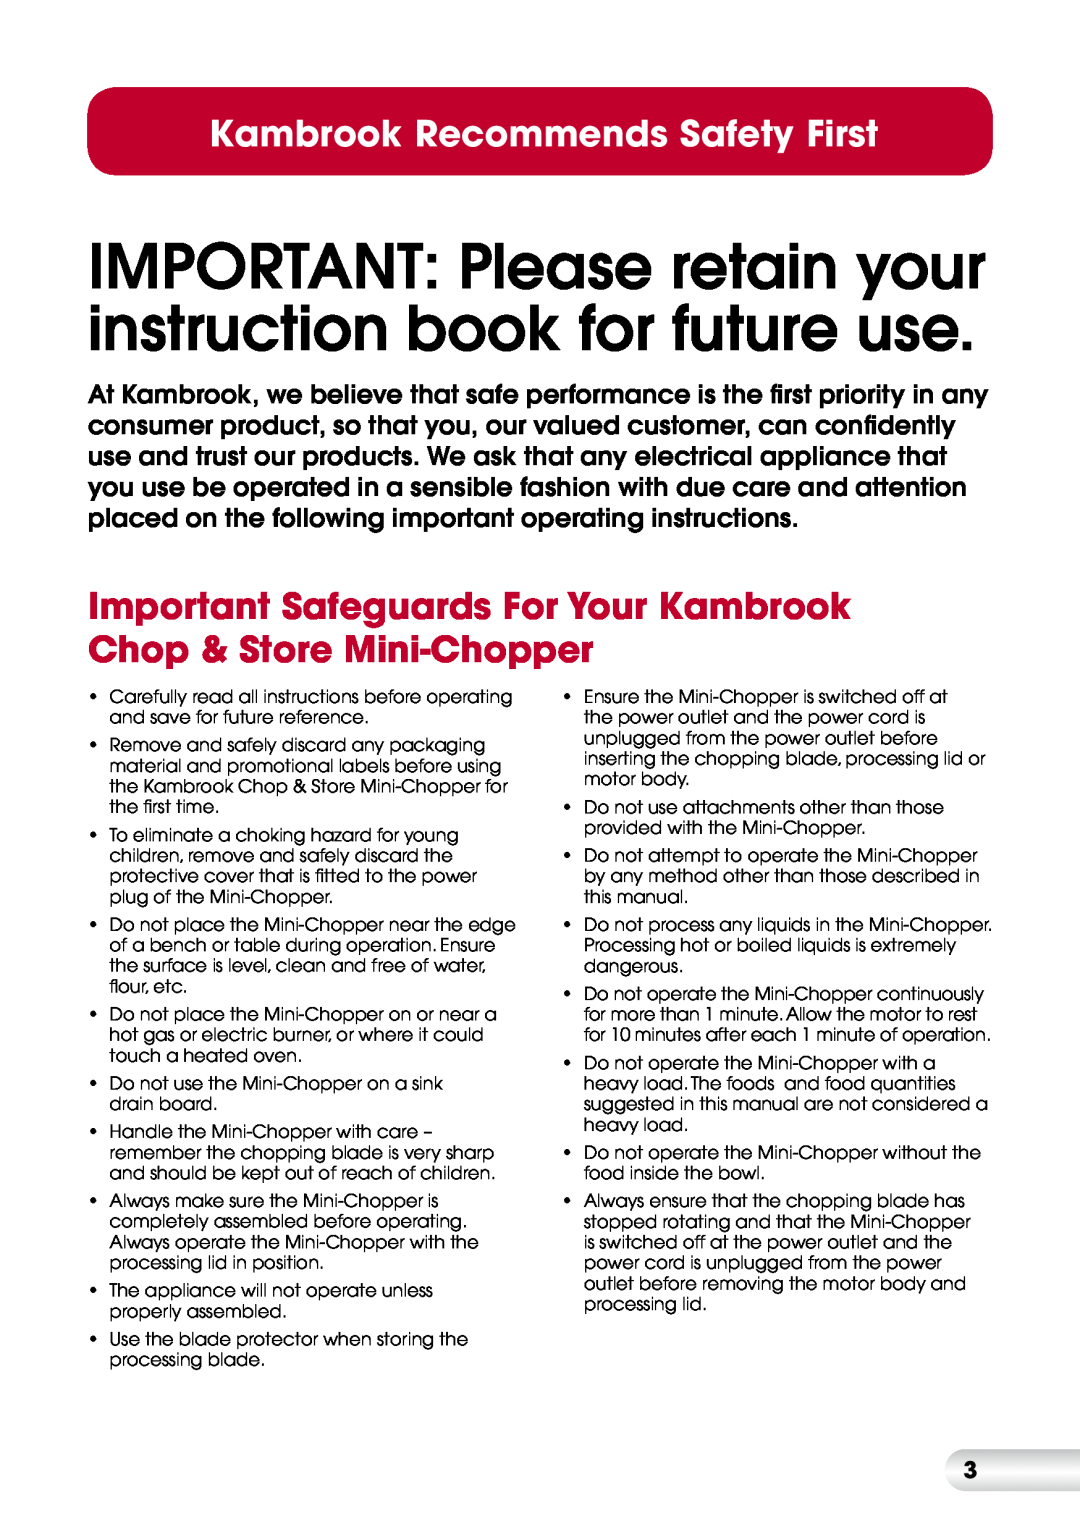 Kambrook KFP40 manual Important Safeguards For Your Kambrook Chop & Store Mini-Chopper, Kambrook Recommends Safety First 